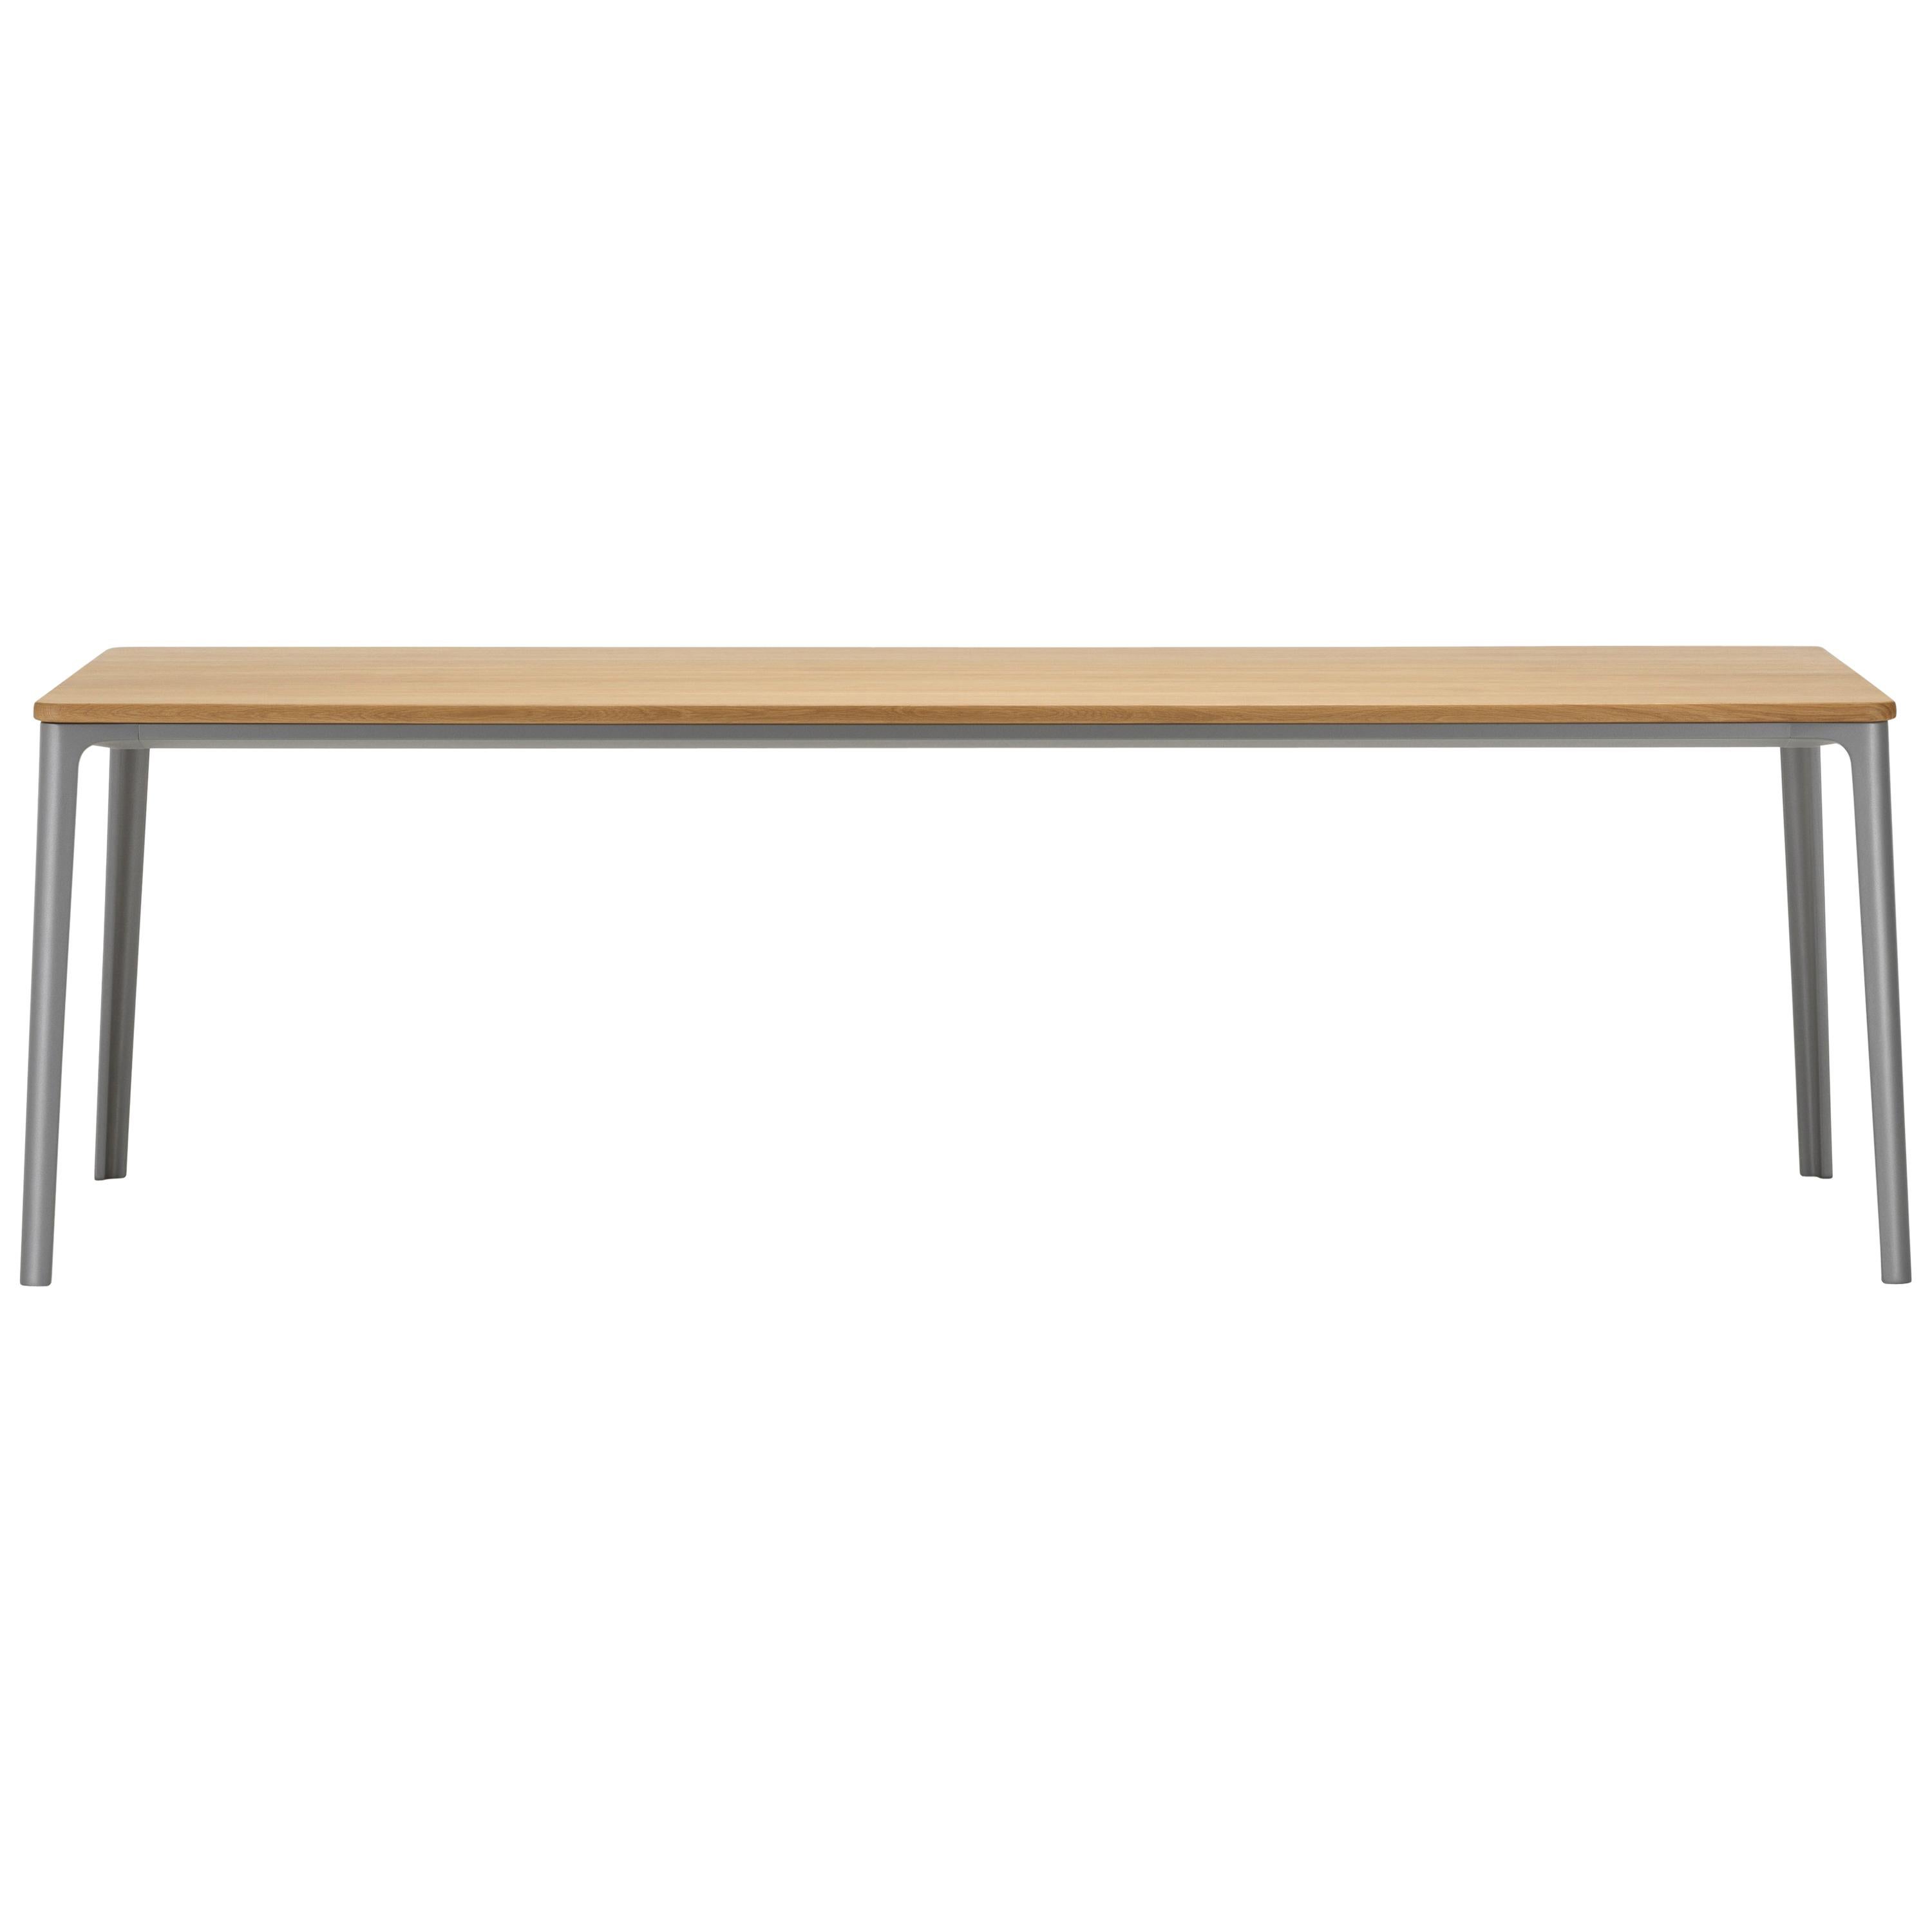 Vitra Plate Dining Table in Natural Oak and Earth Grey Base by Jasper Morrison im Angebot